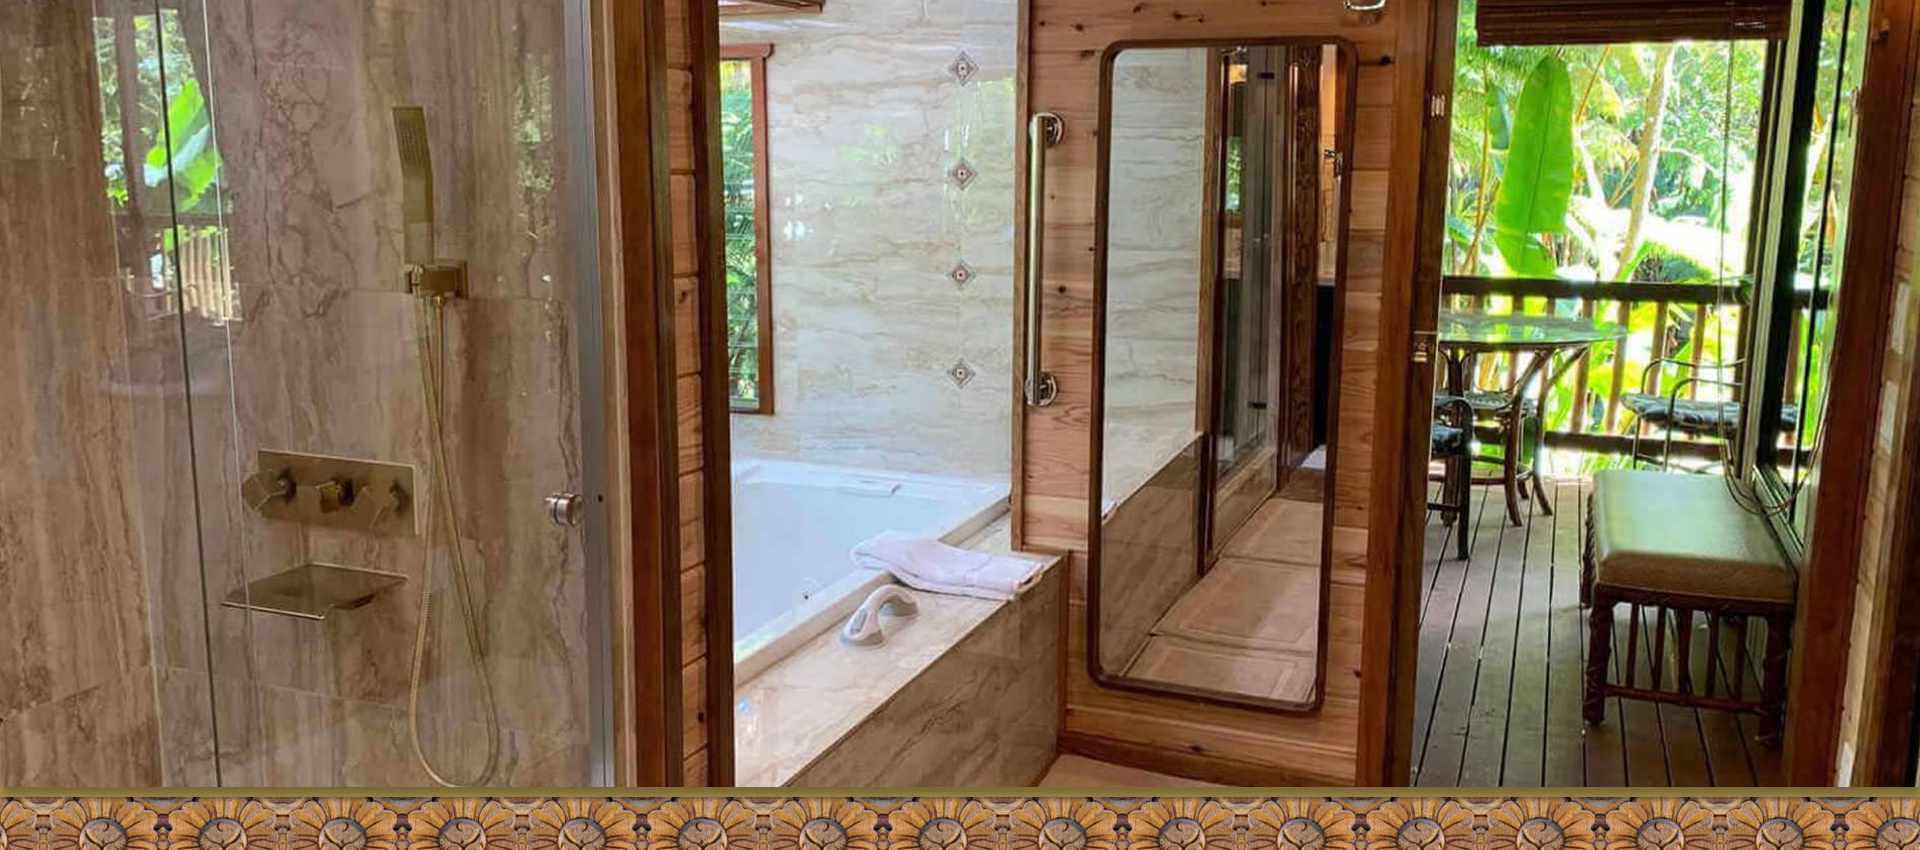 Aloha Moon Cottage private luxury jetted spa bath with separate shower